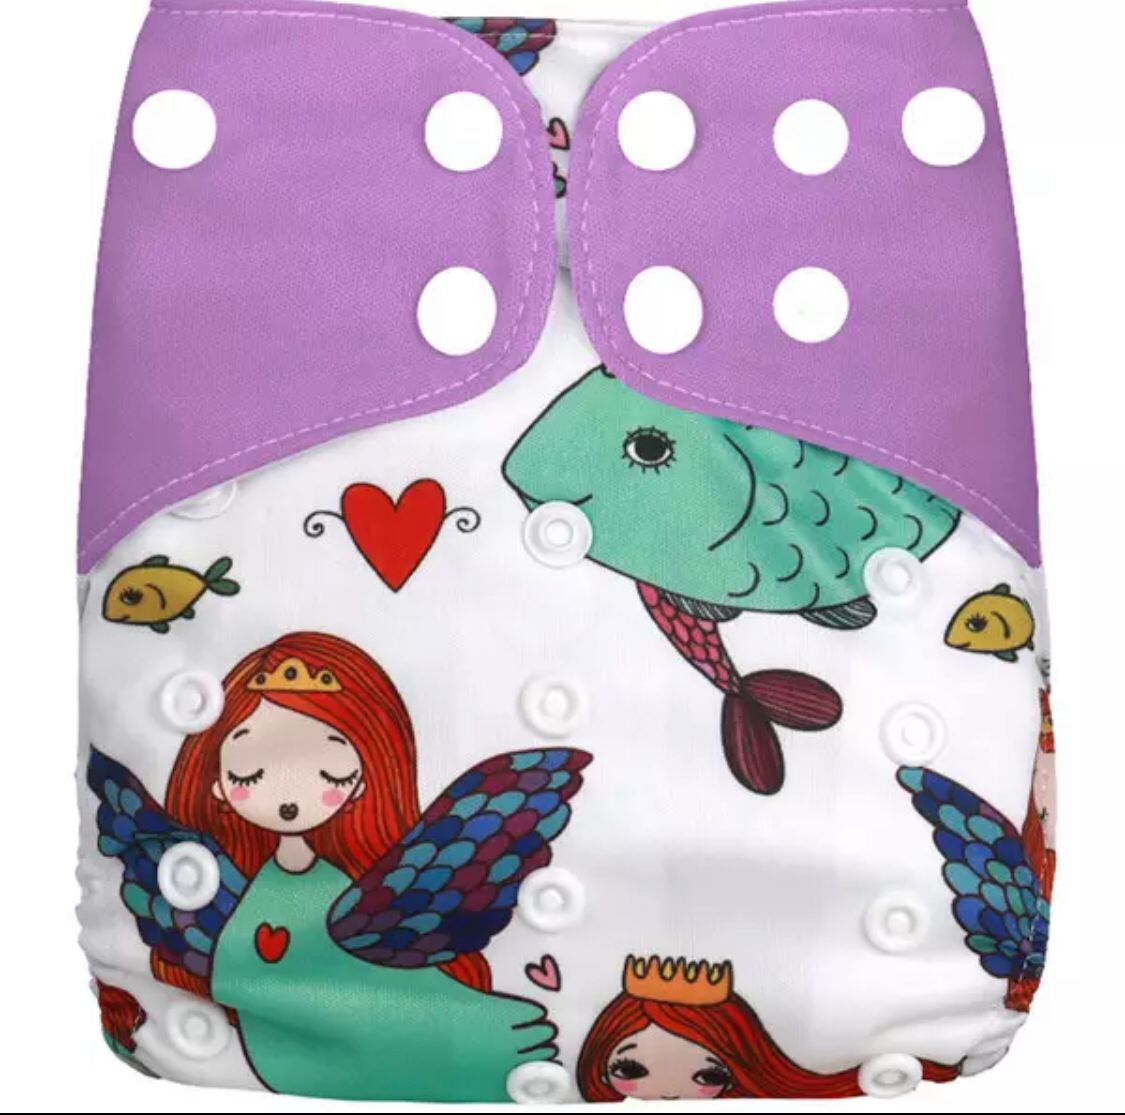 Pikkaboo Reusable Cloth Diaper with Adjustable Snap Buttons for Babies and Toddlers - Mermaid